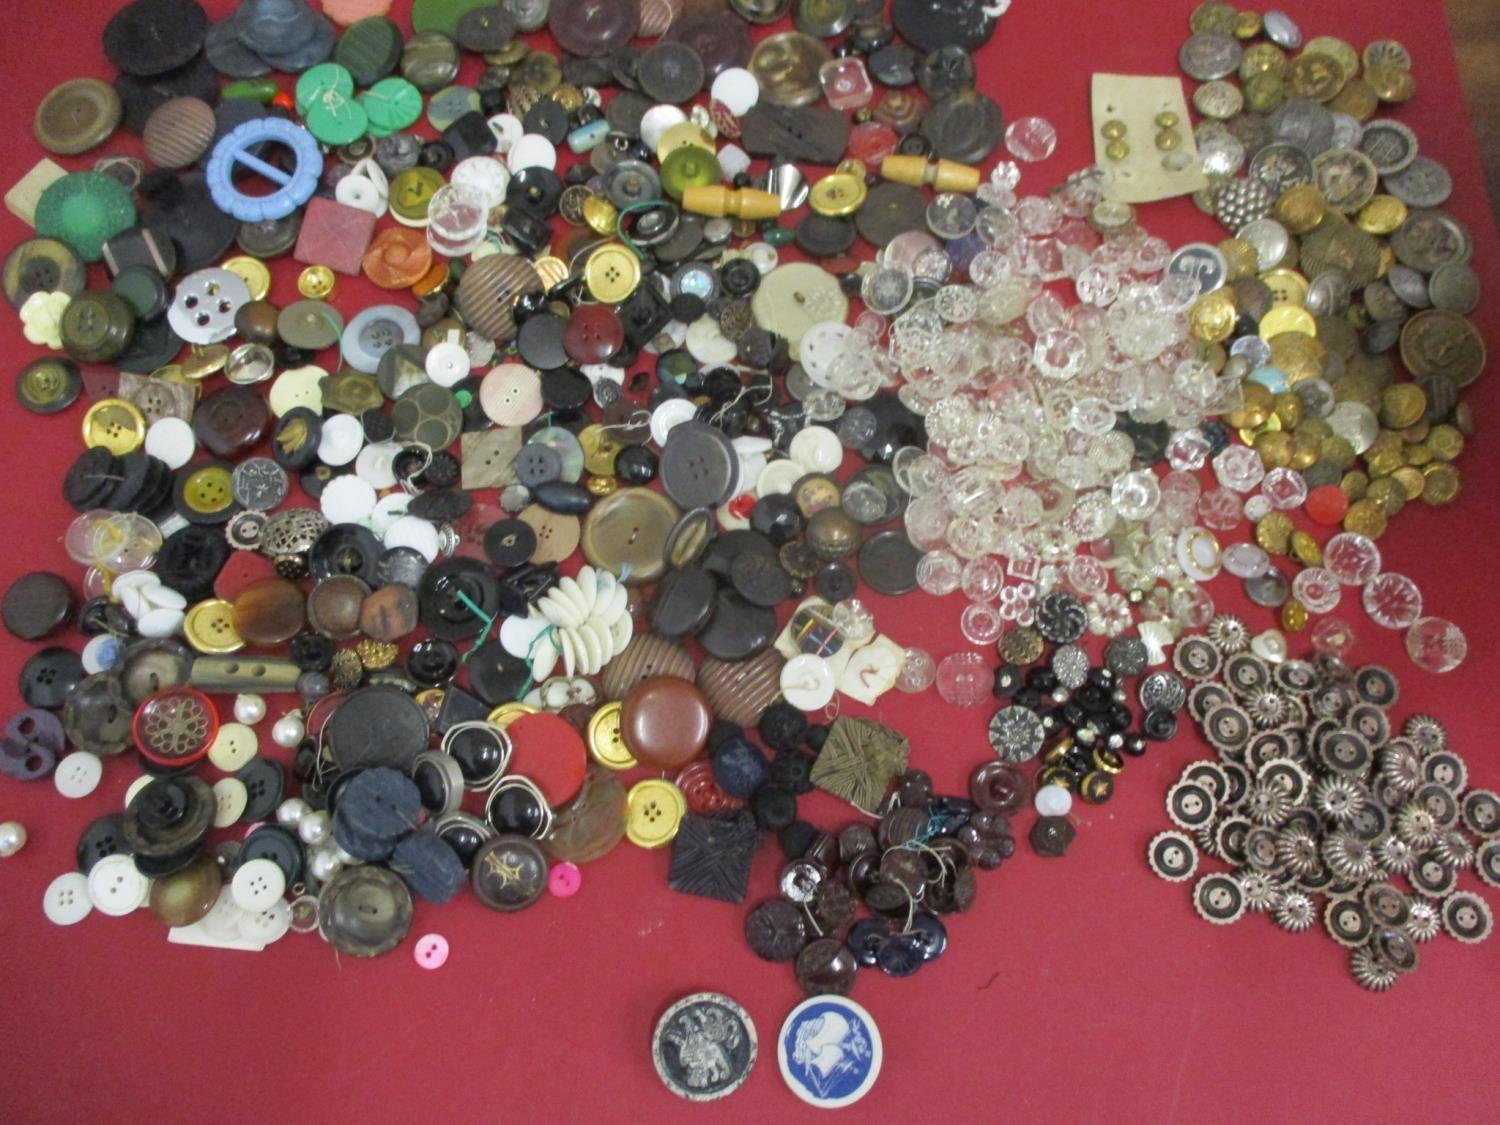 A collection of early 20th century fabric covered buttons, military and blazer buttons, vintage